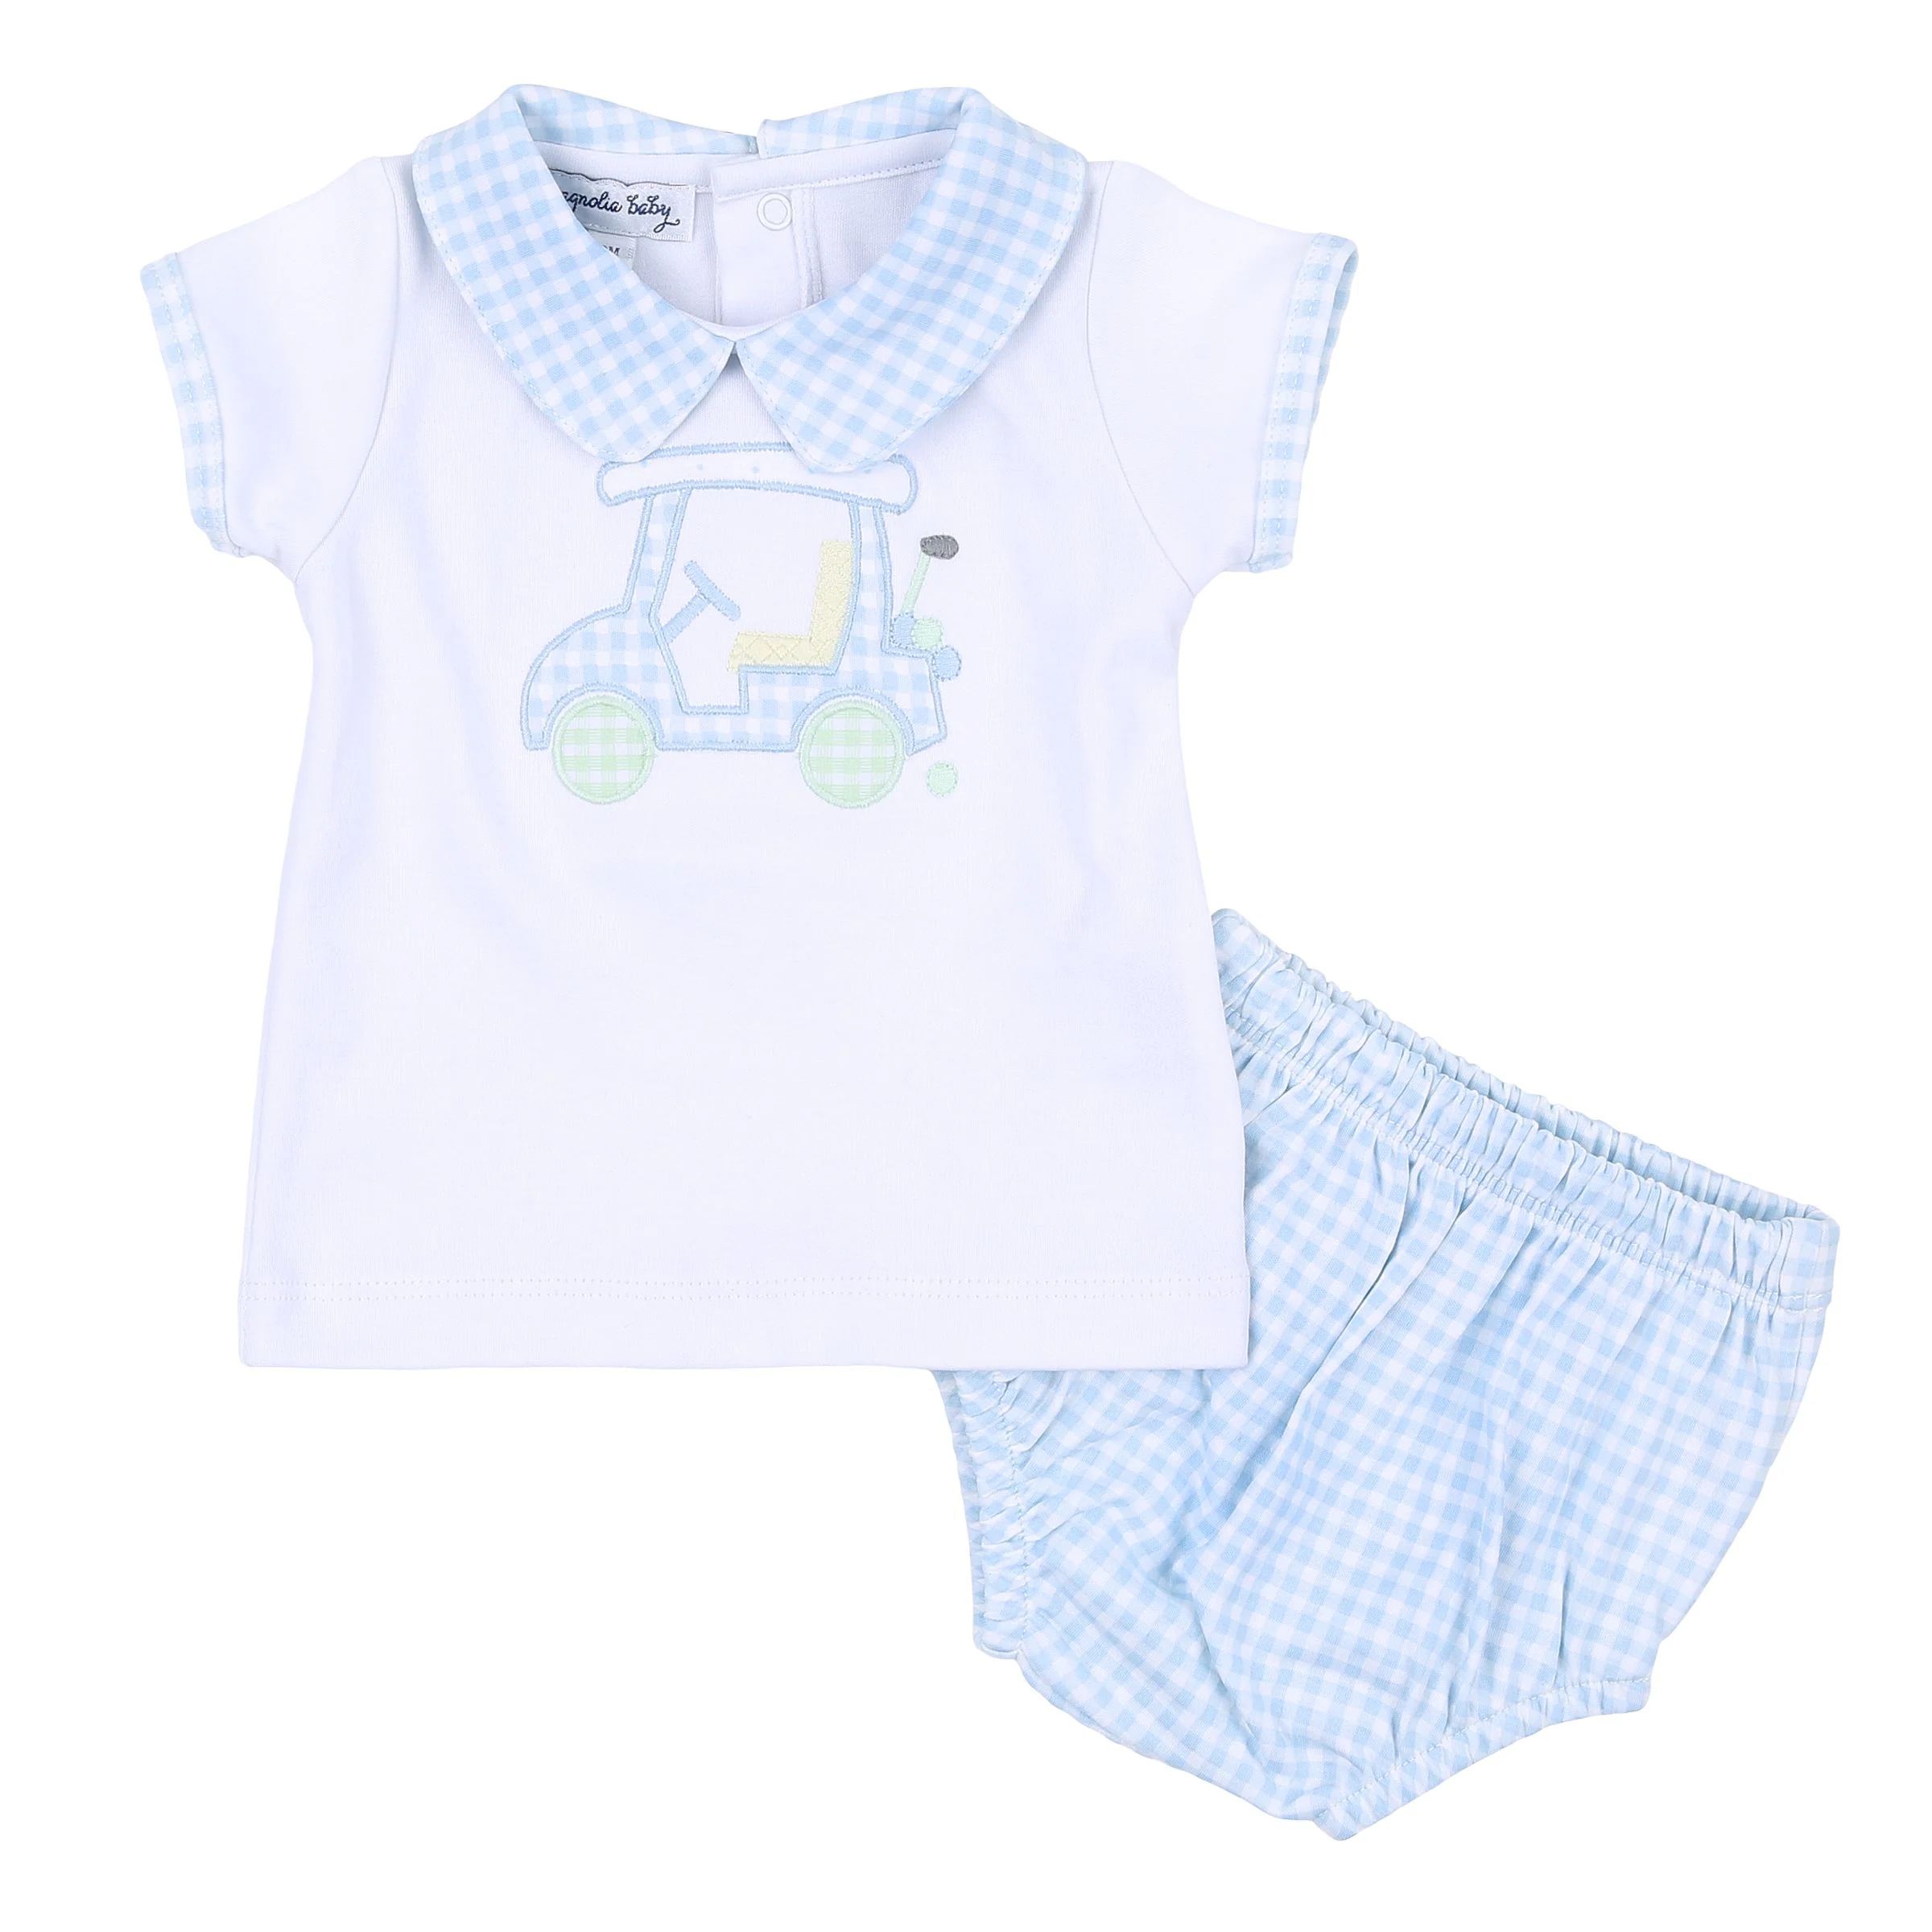 Magnolia Baby Little Caddie Applique Collared Diaper Cover Set | JoJo Mommy